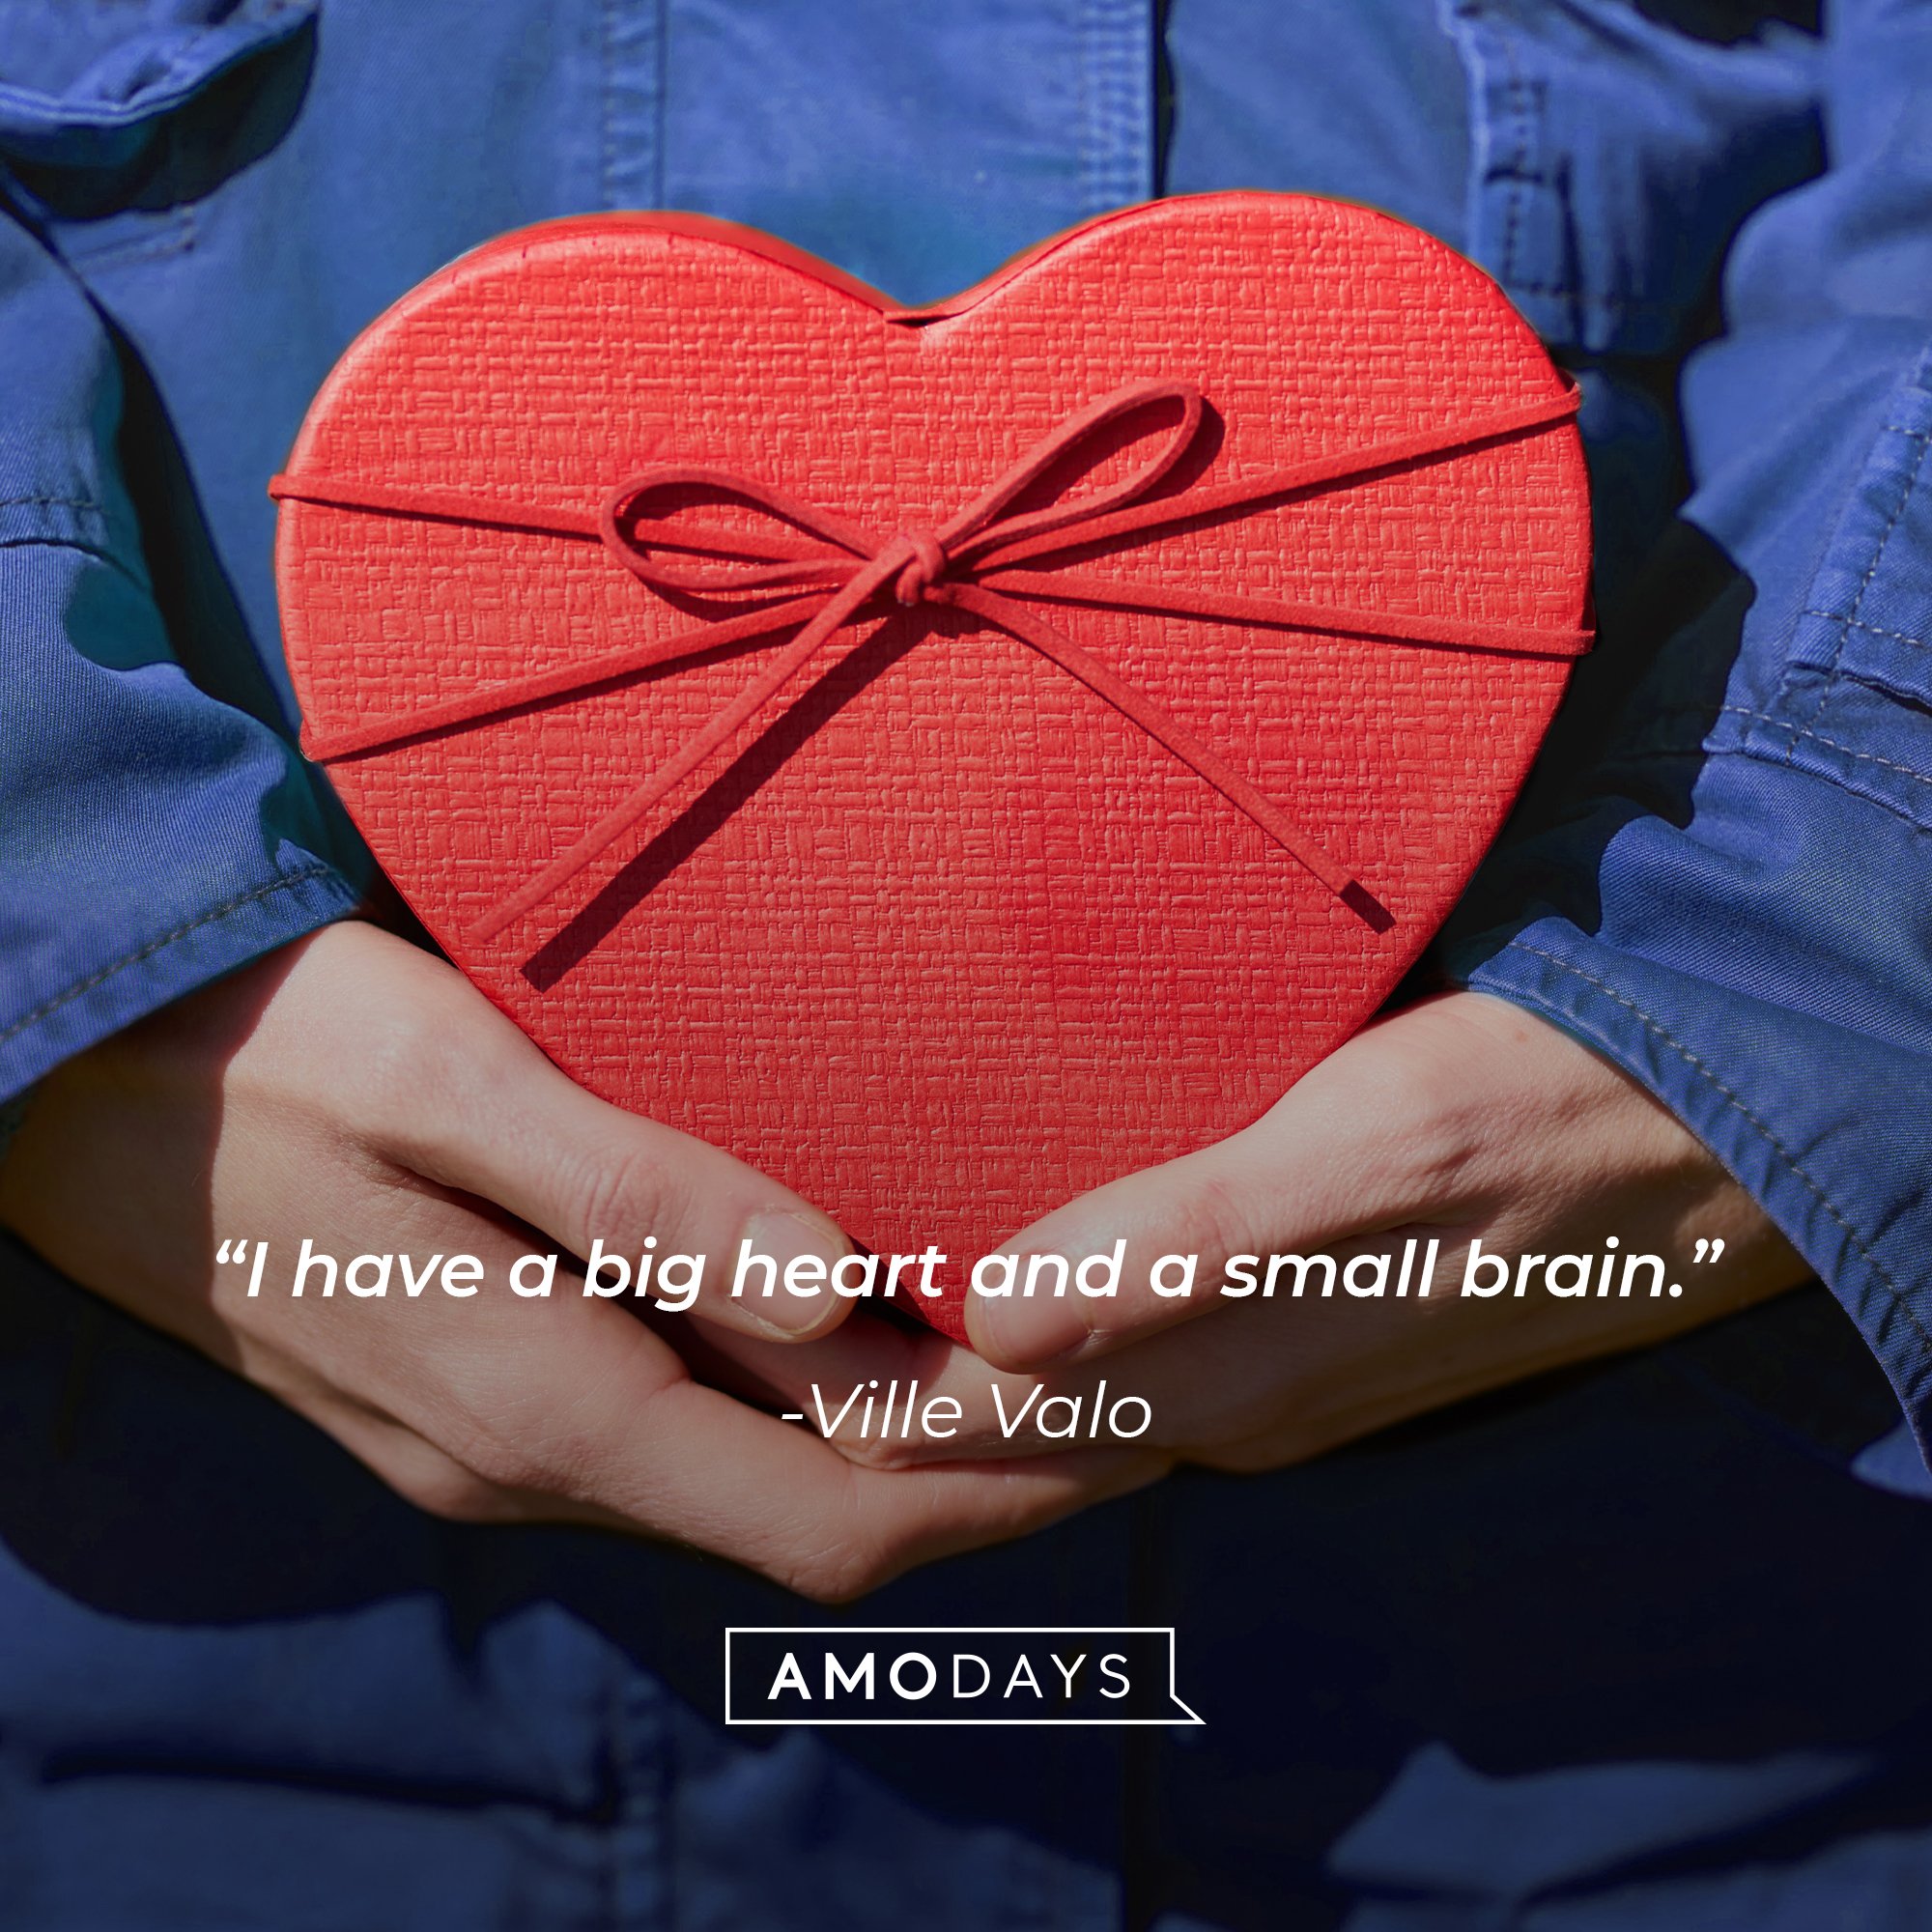 Ville Valo's quote: "I have a big heart and a small brain." | Image: AmoDays